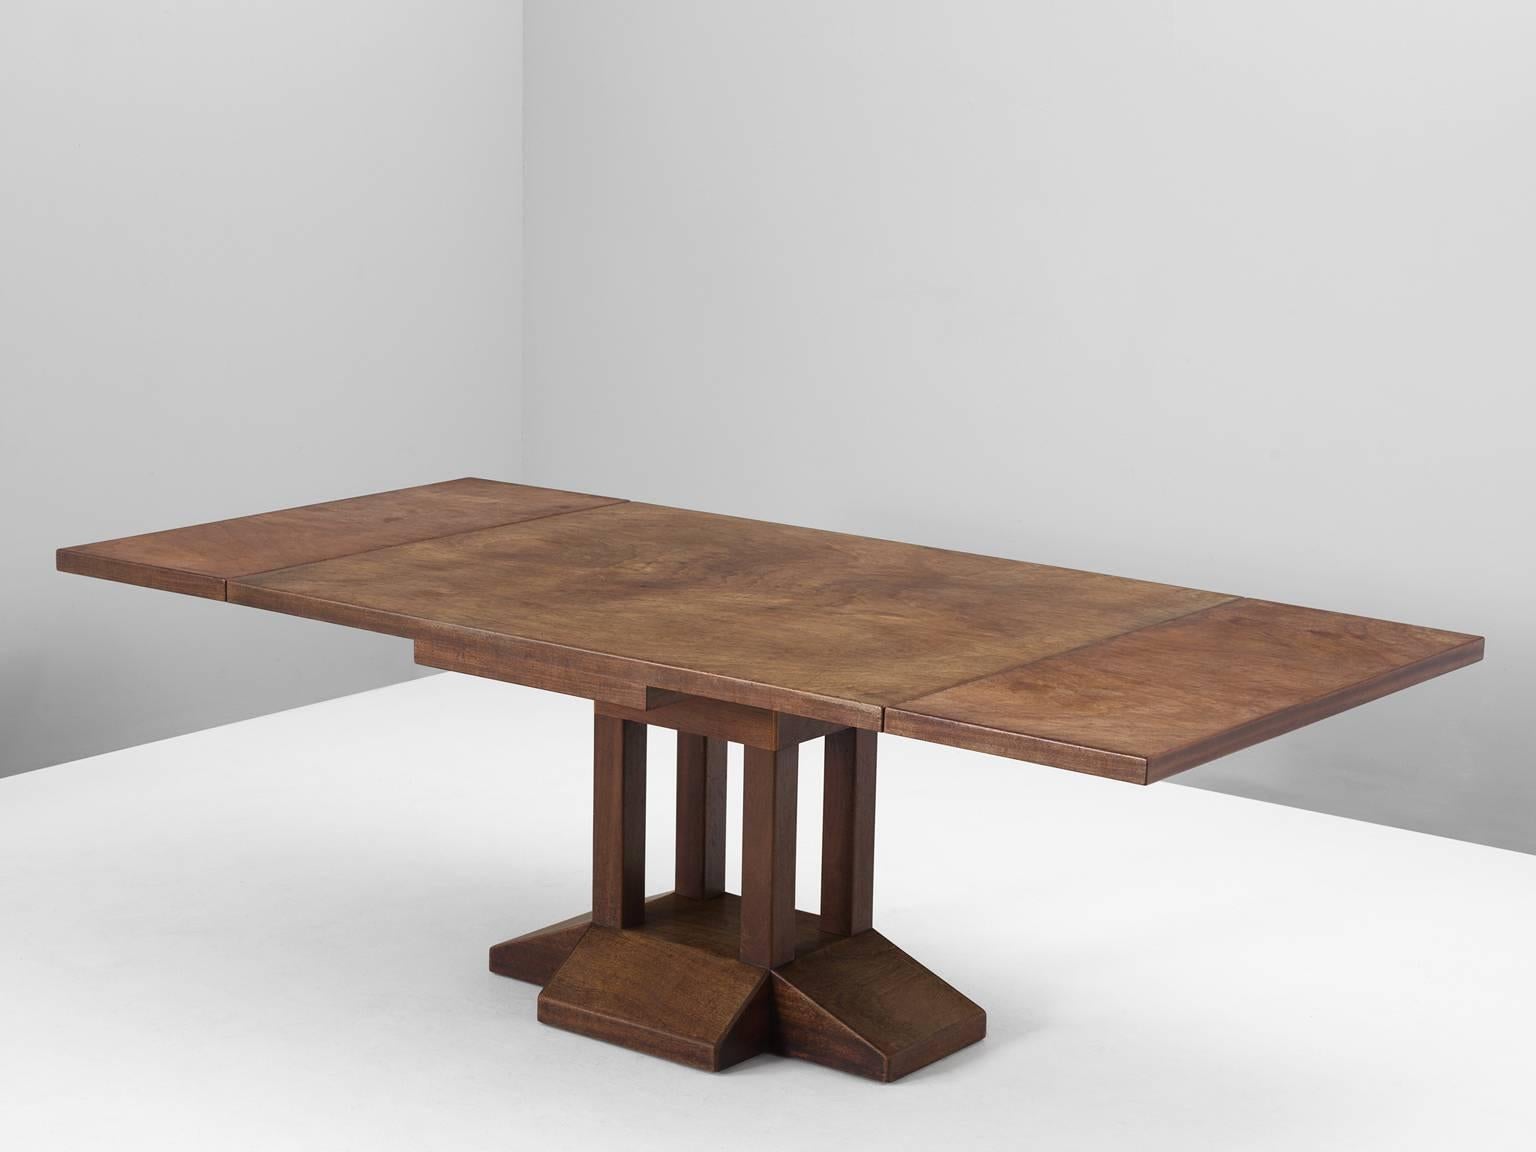 Dining table, in mahogany, attributed to Sarah Lipska, France, 1930s.

Extendable dining table in mahogany. This rectangular table shows an interesting architectural base. By the sloping feet and four solid legs, the base has the characteristics